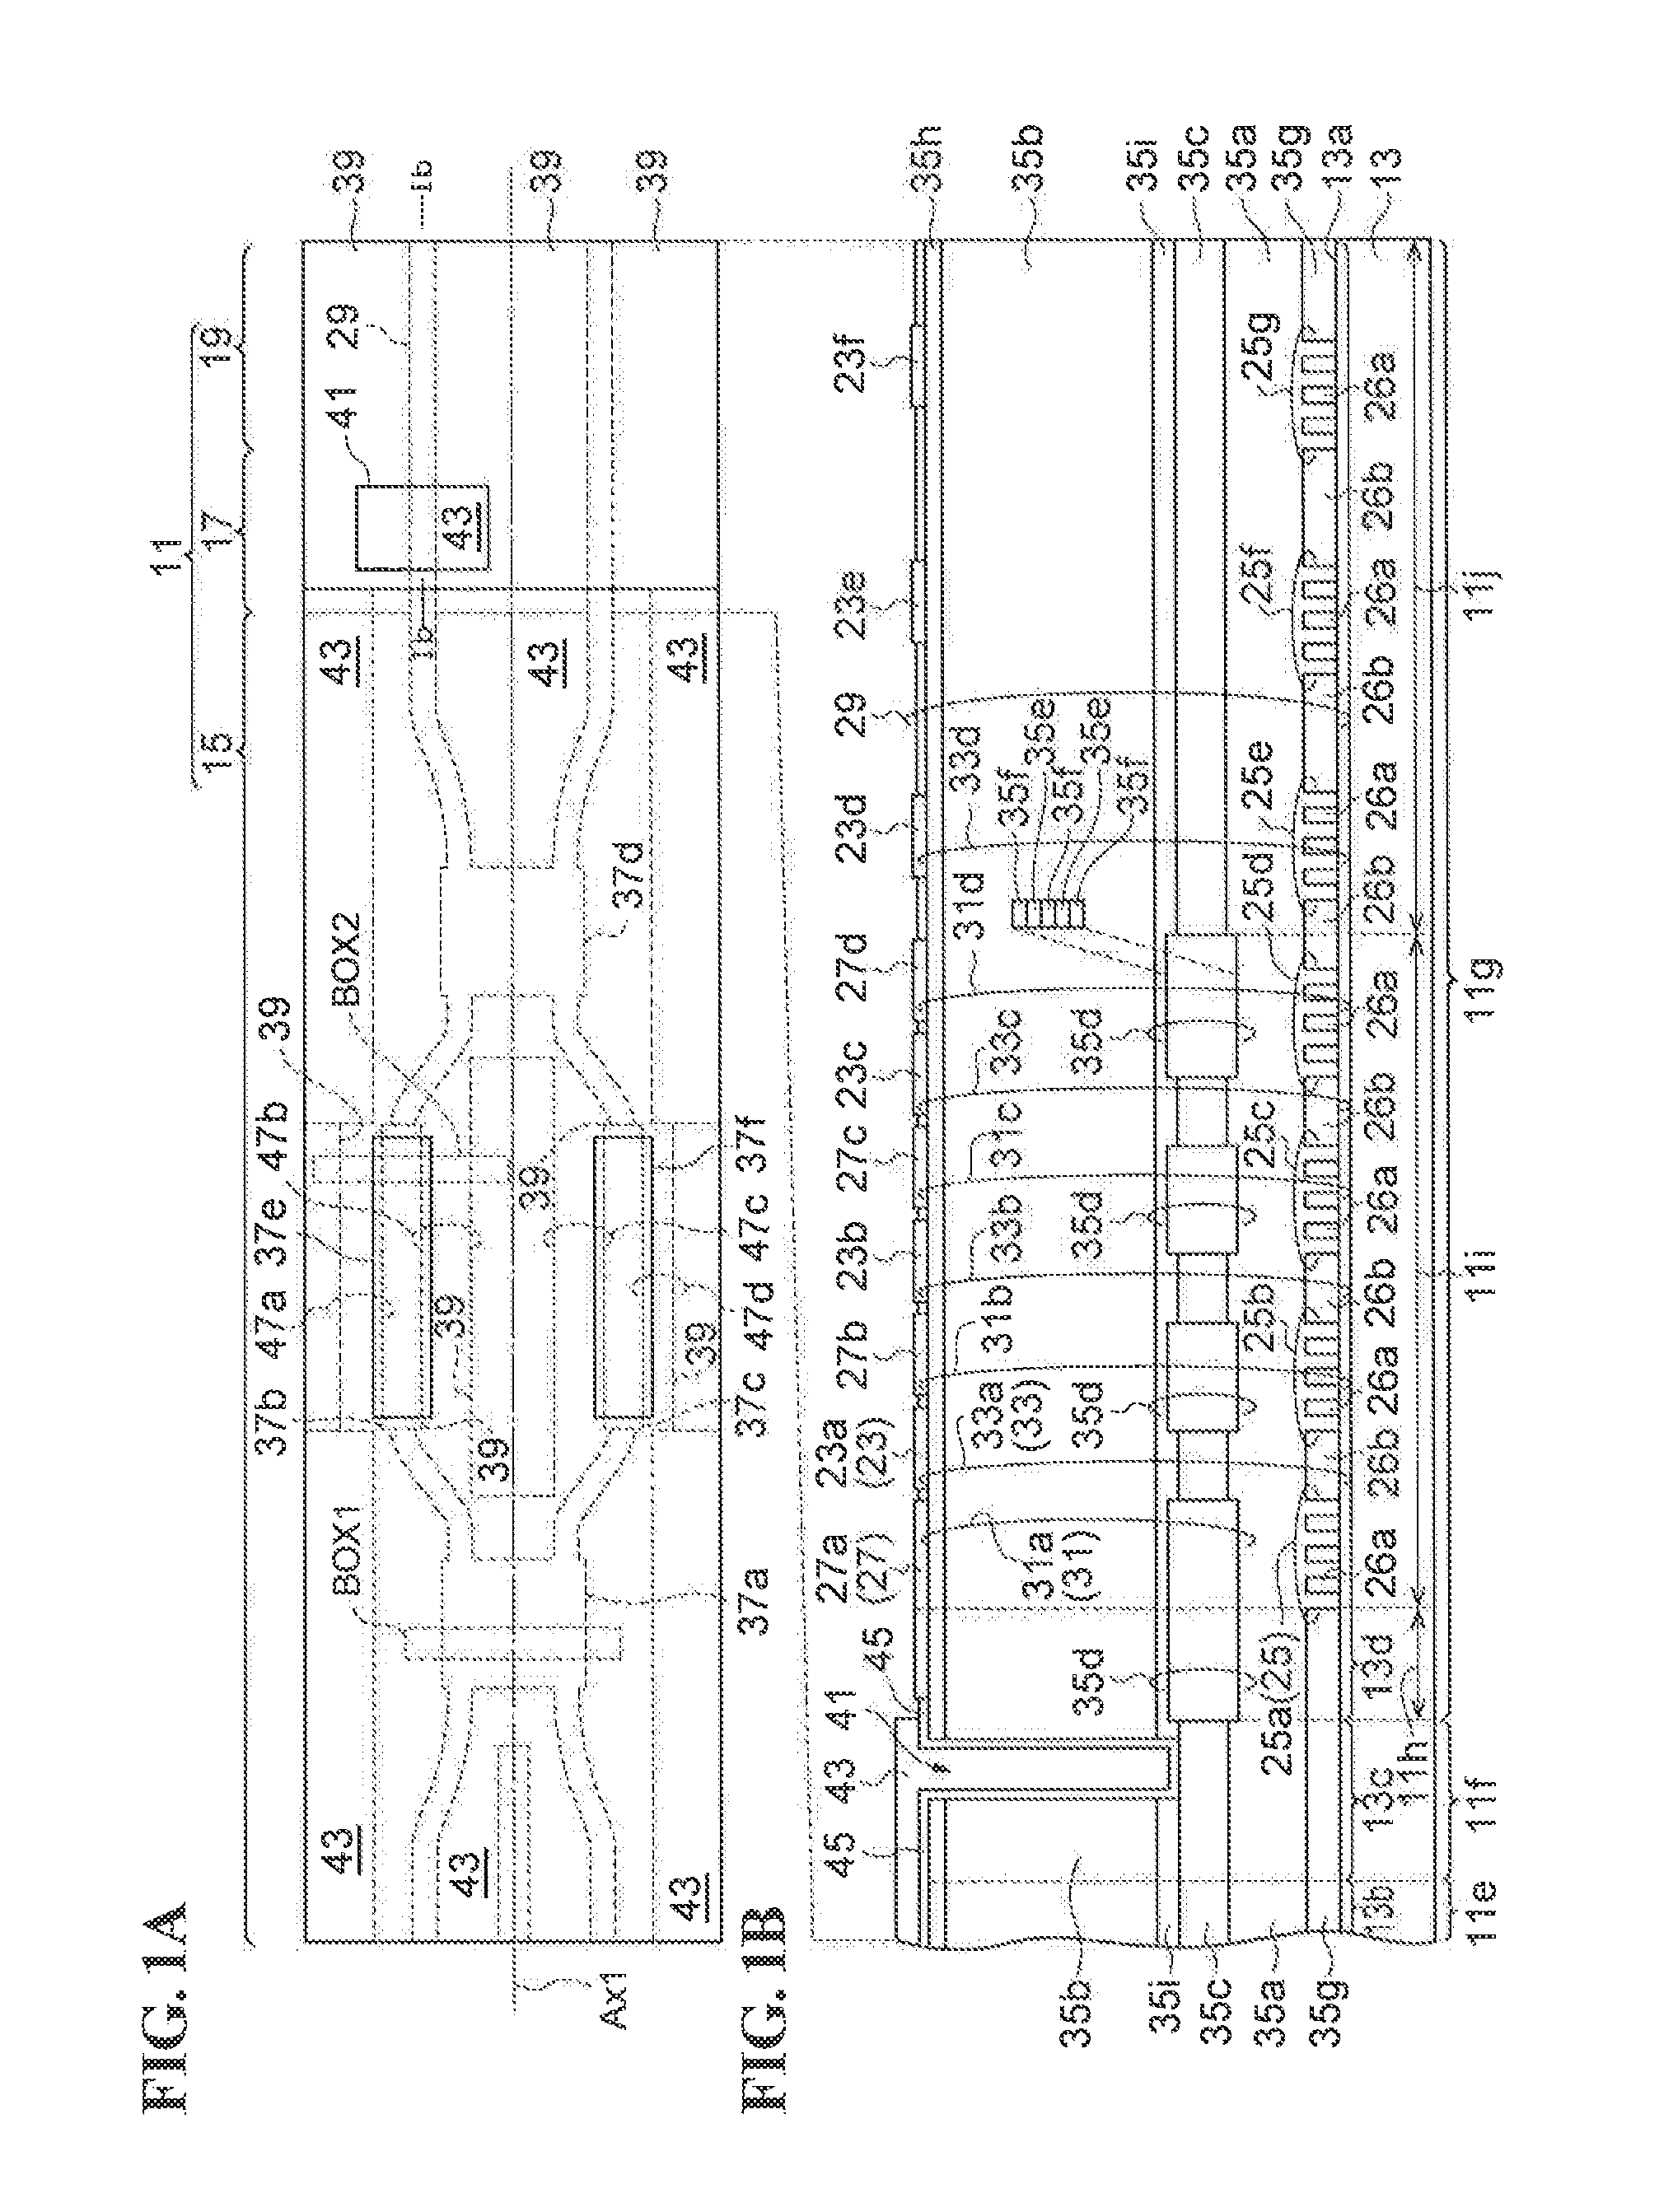 Semiconductor optical integrated device